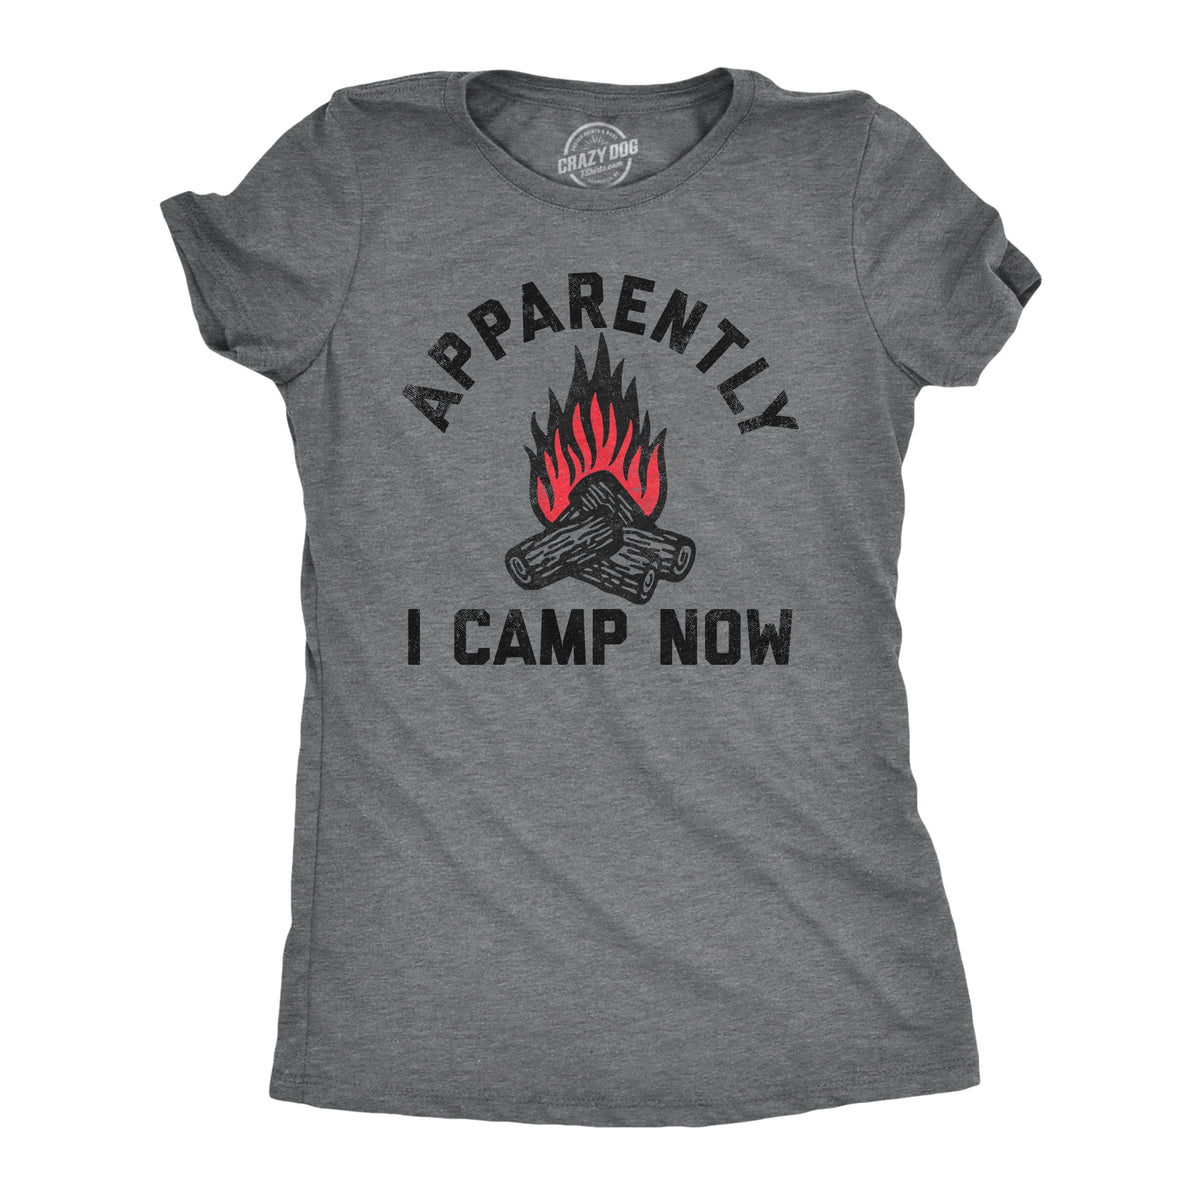 Funny Dark Heather Grey - Camp Now Apparently I Camp Now Womens T Shirt Nerdy Camping sarcastic Tee